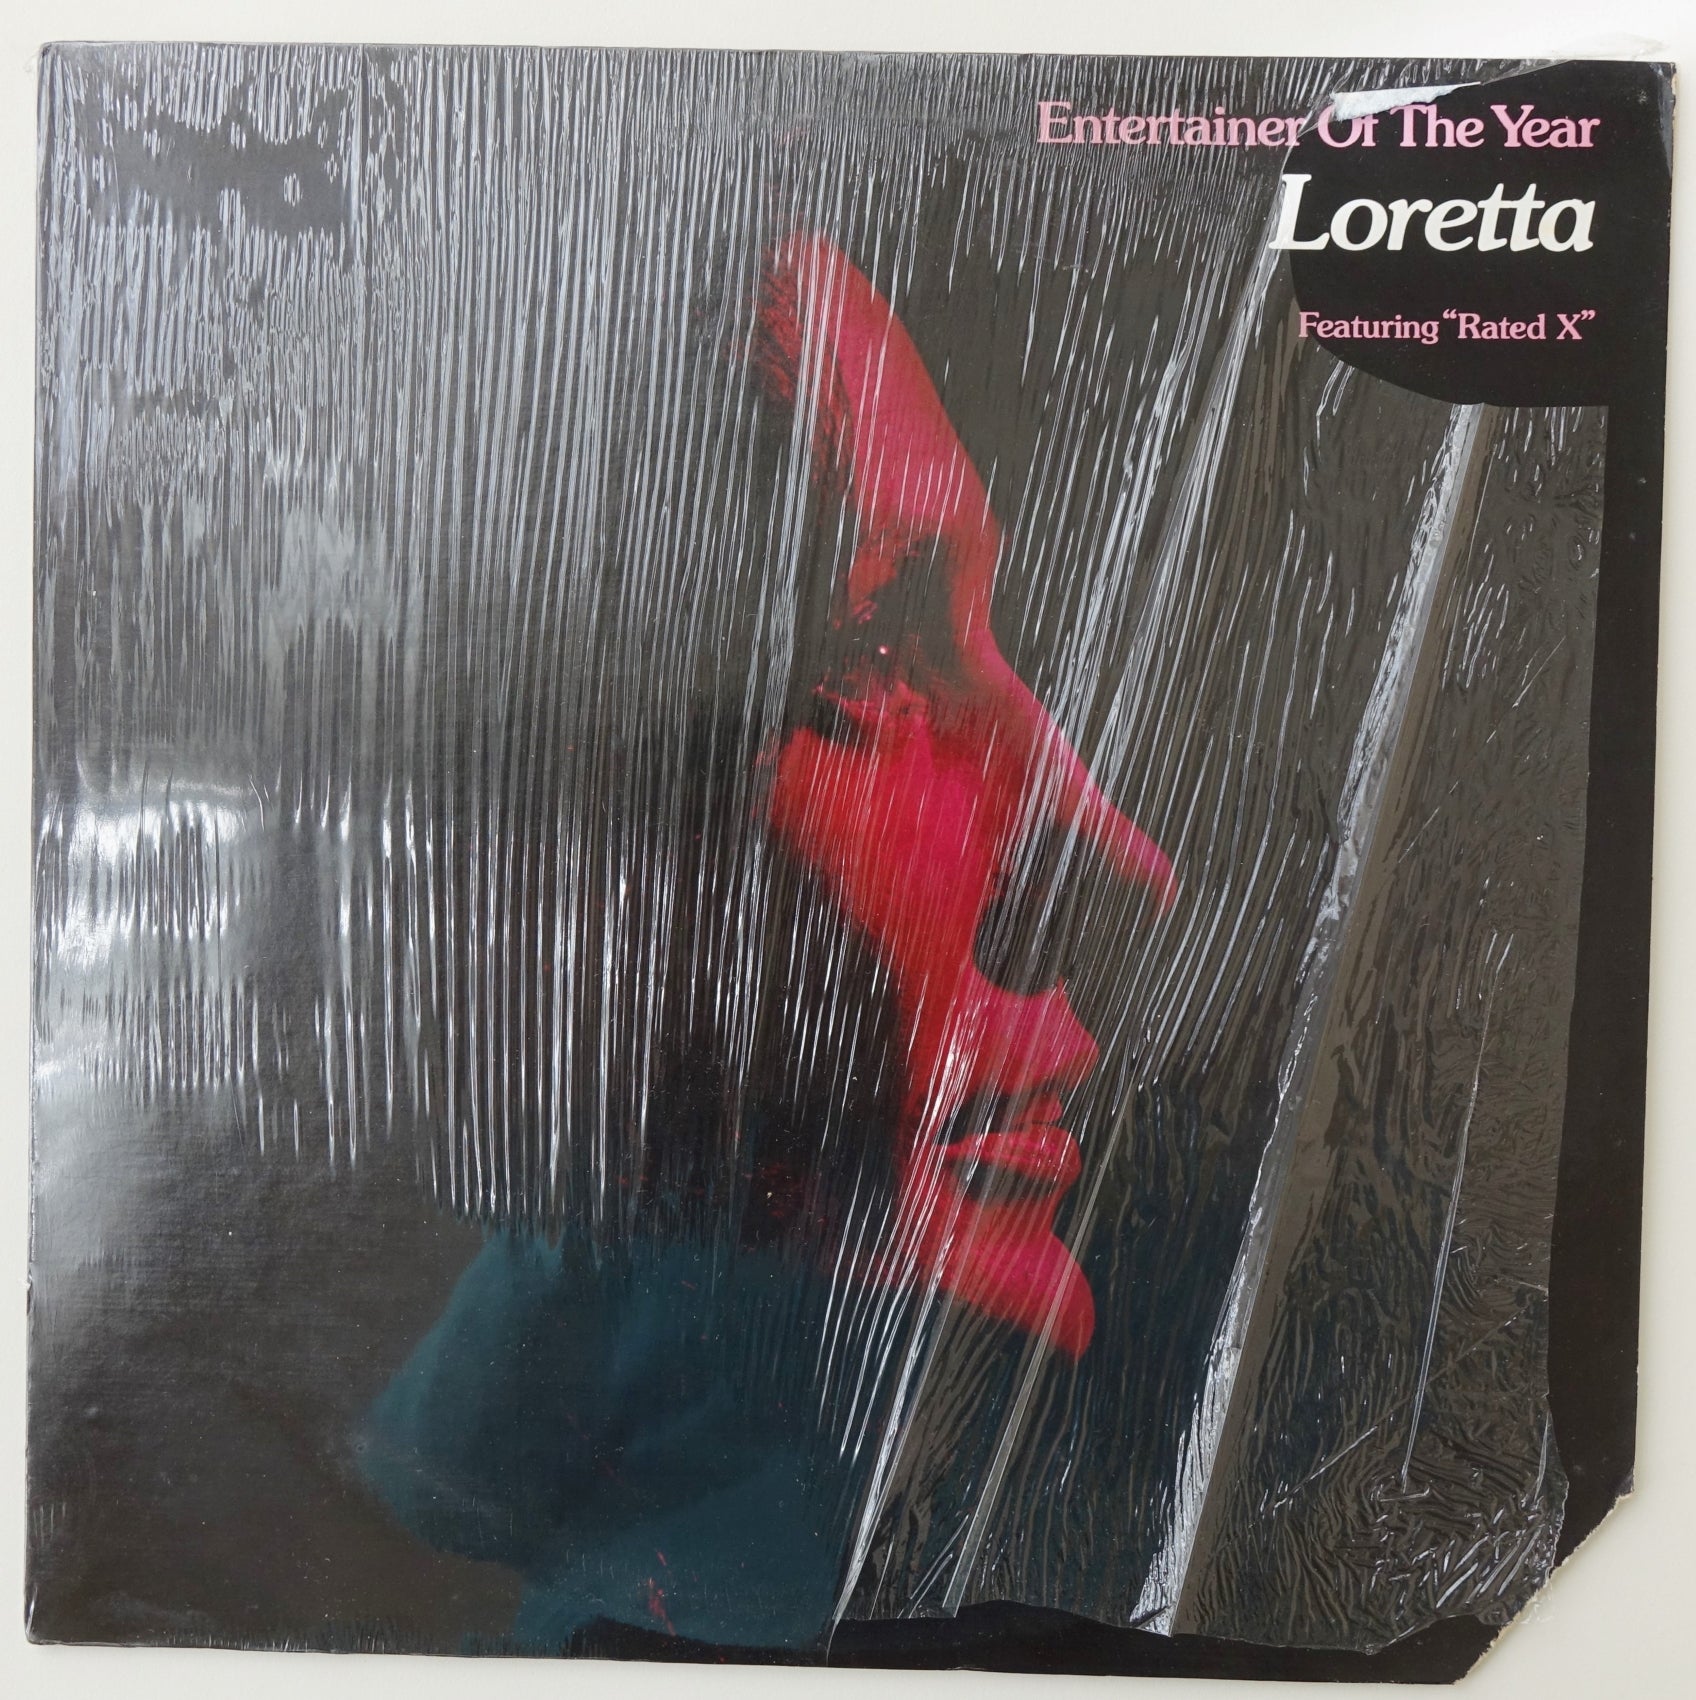 MCA004: Entertainer of the Year - Loretta - Featuring 